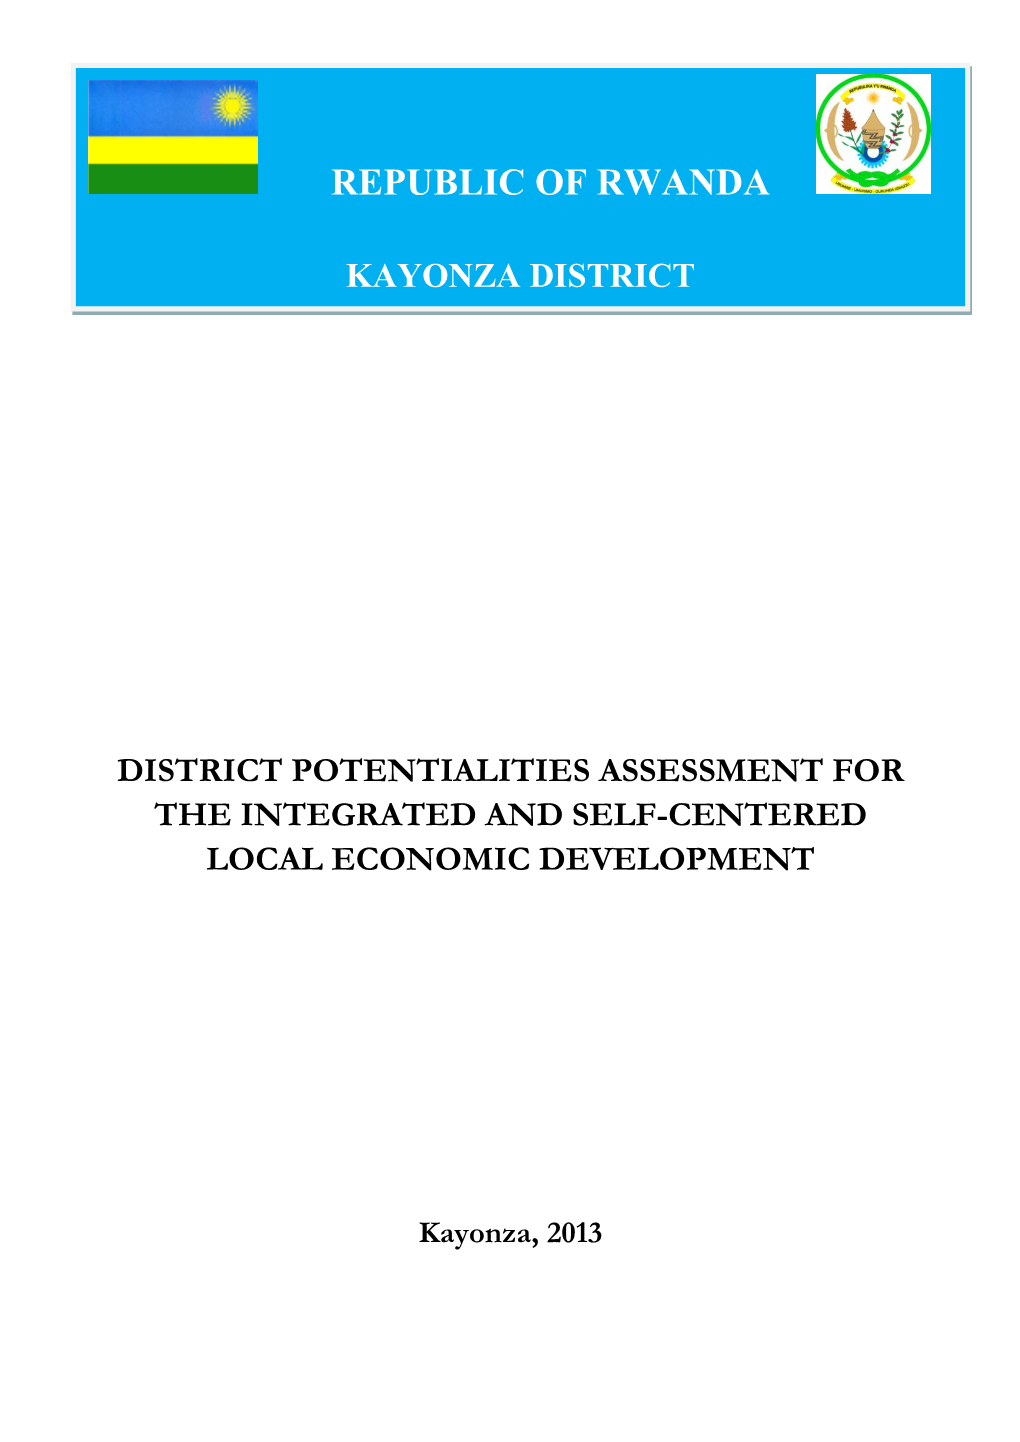 Kayonza District Potentialities